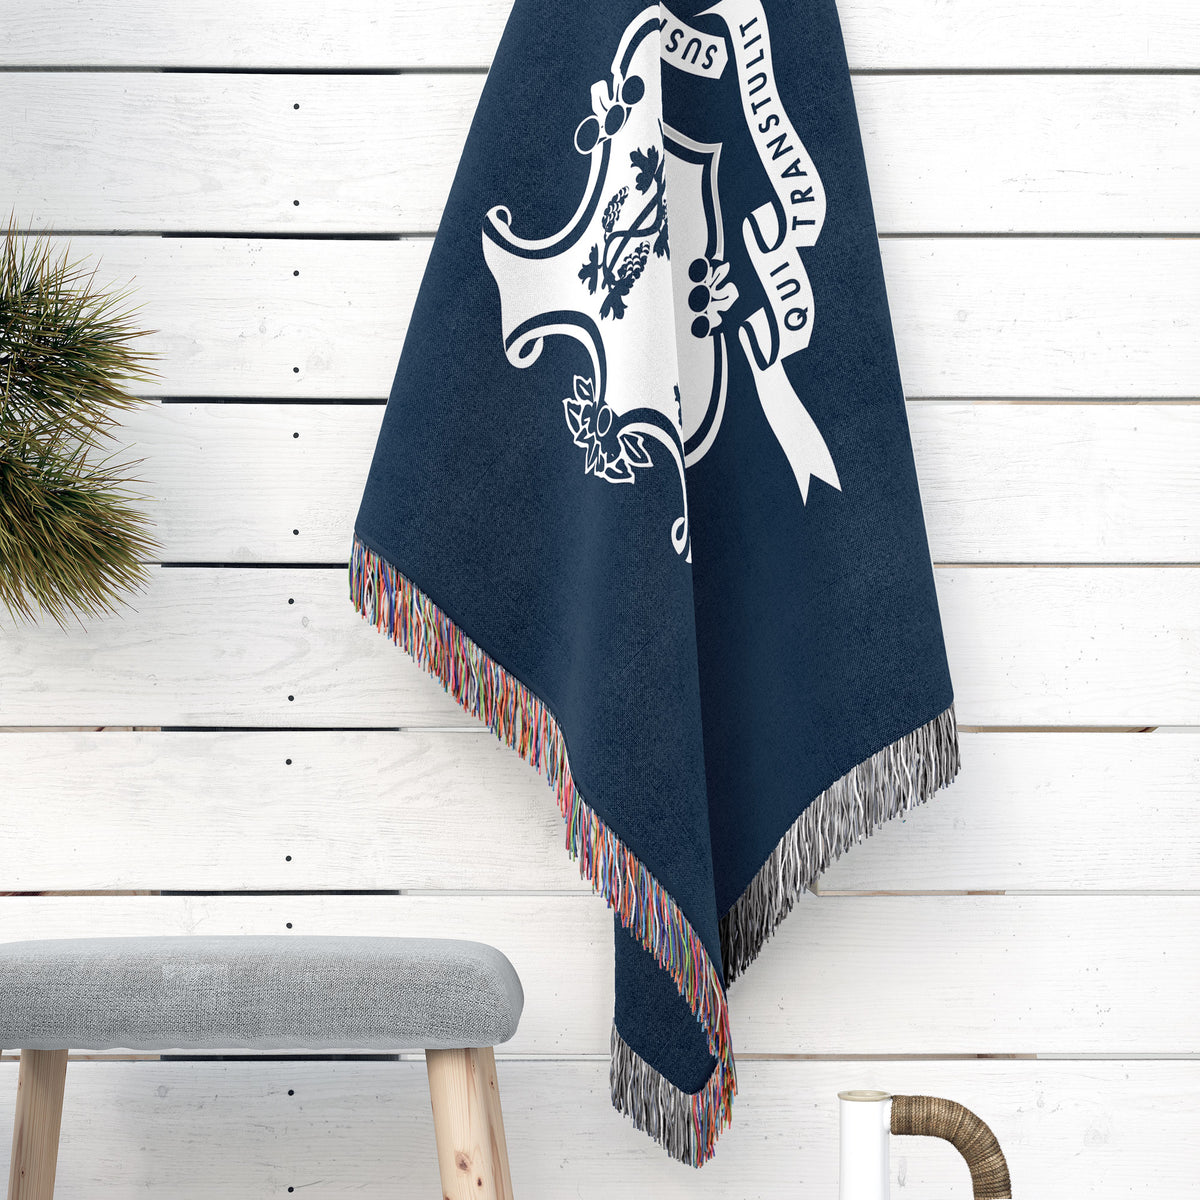 Connecticut State Woven Cotton Blanket - Point Two Design